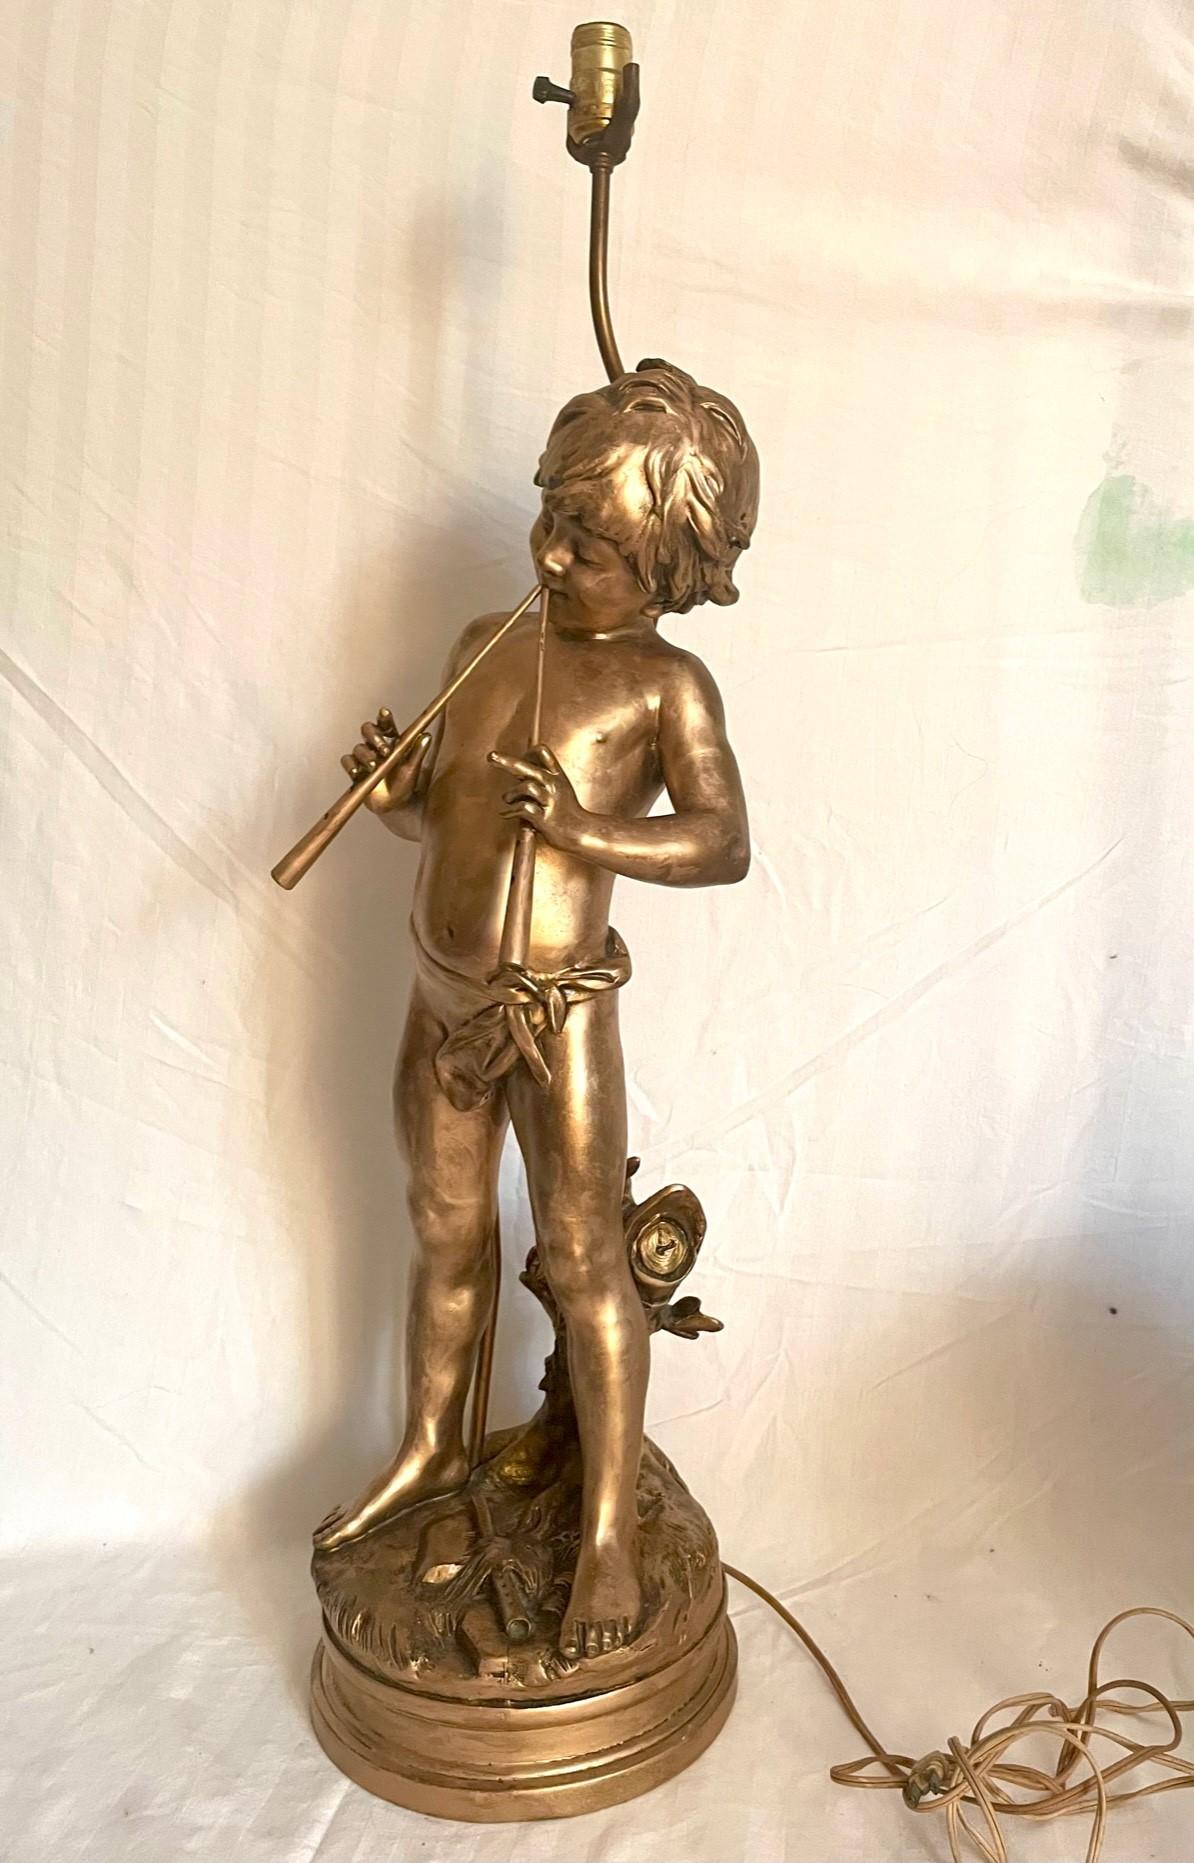 19th Century French Gilt Bronzed Lamp Sculpture “Boy with Flute”, Signed Moreau. For Sale 7